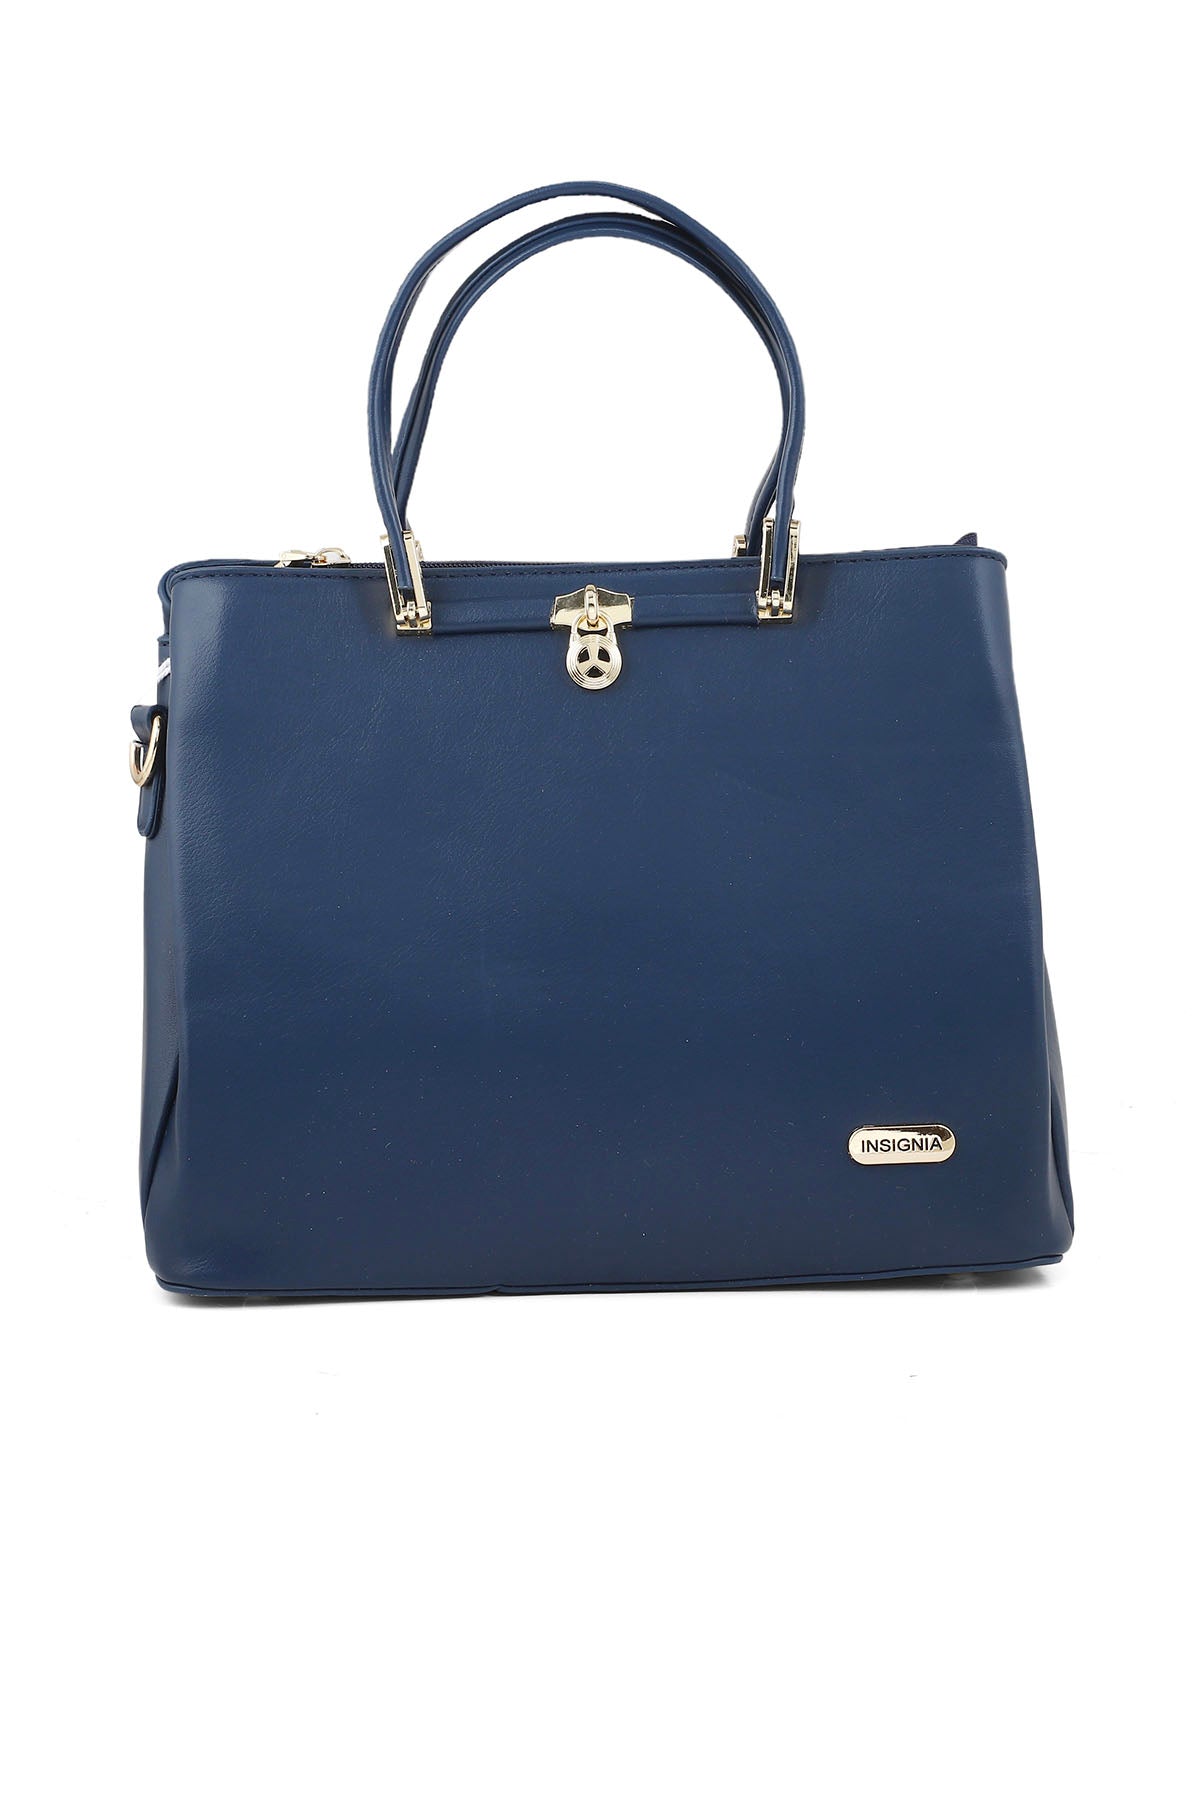 Formal Tote Hand Bags B15055-Navy